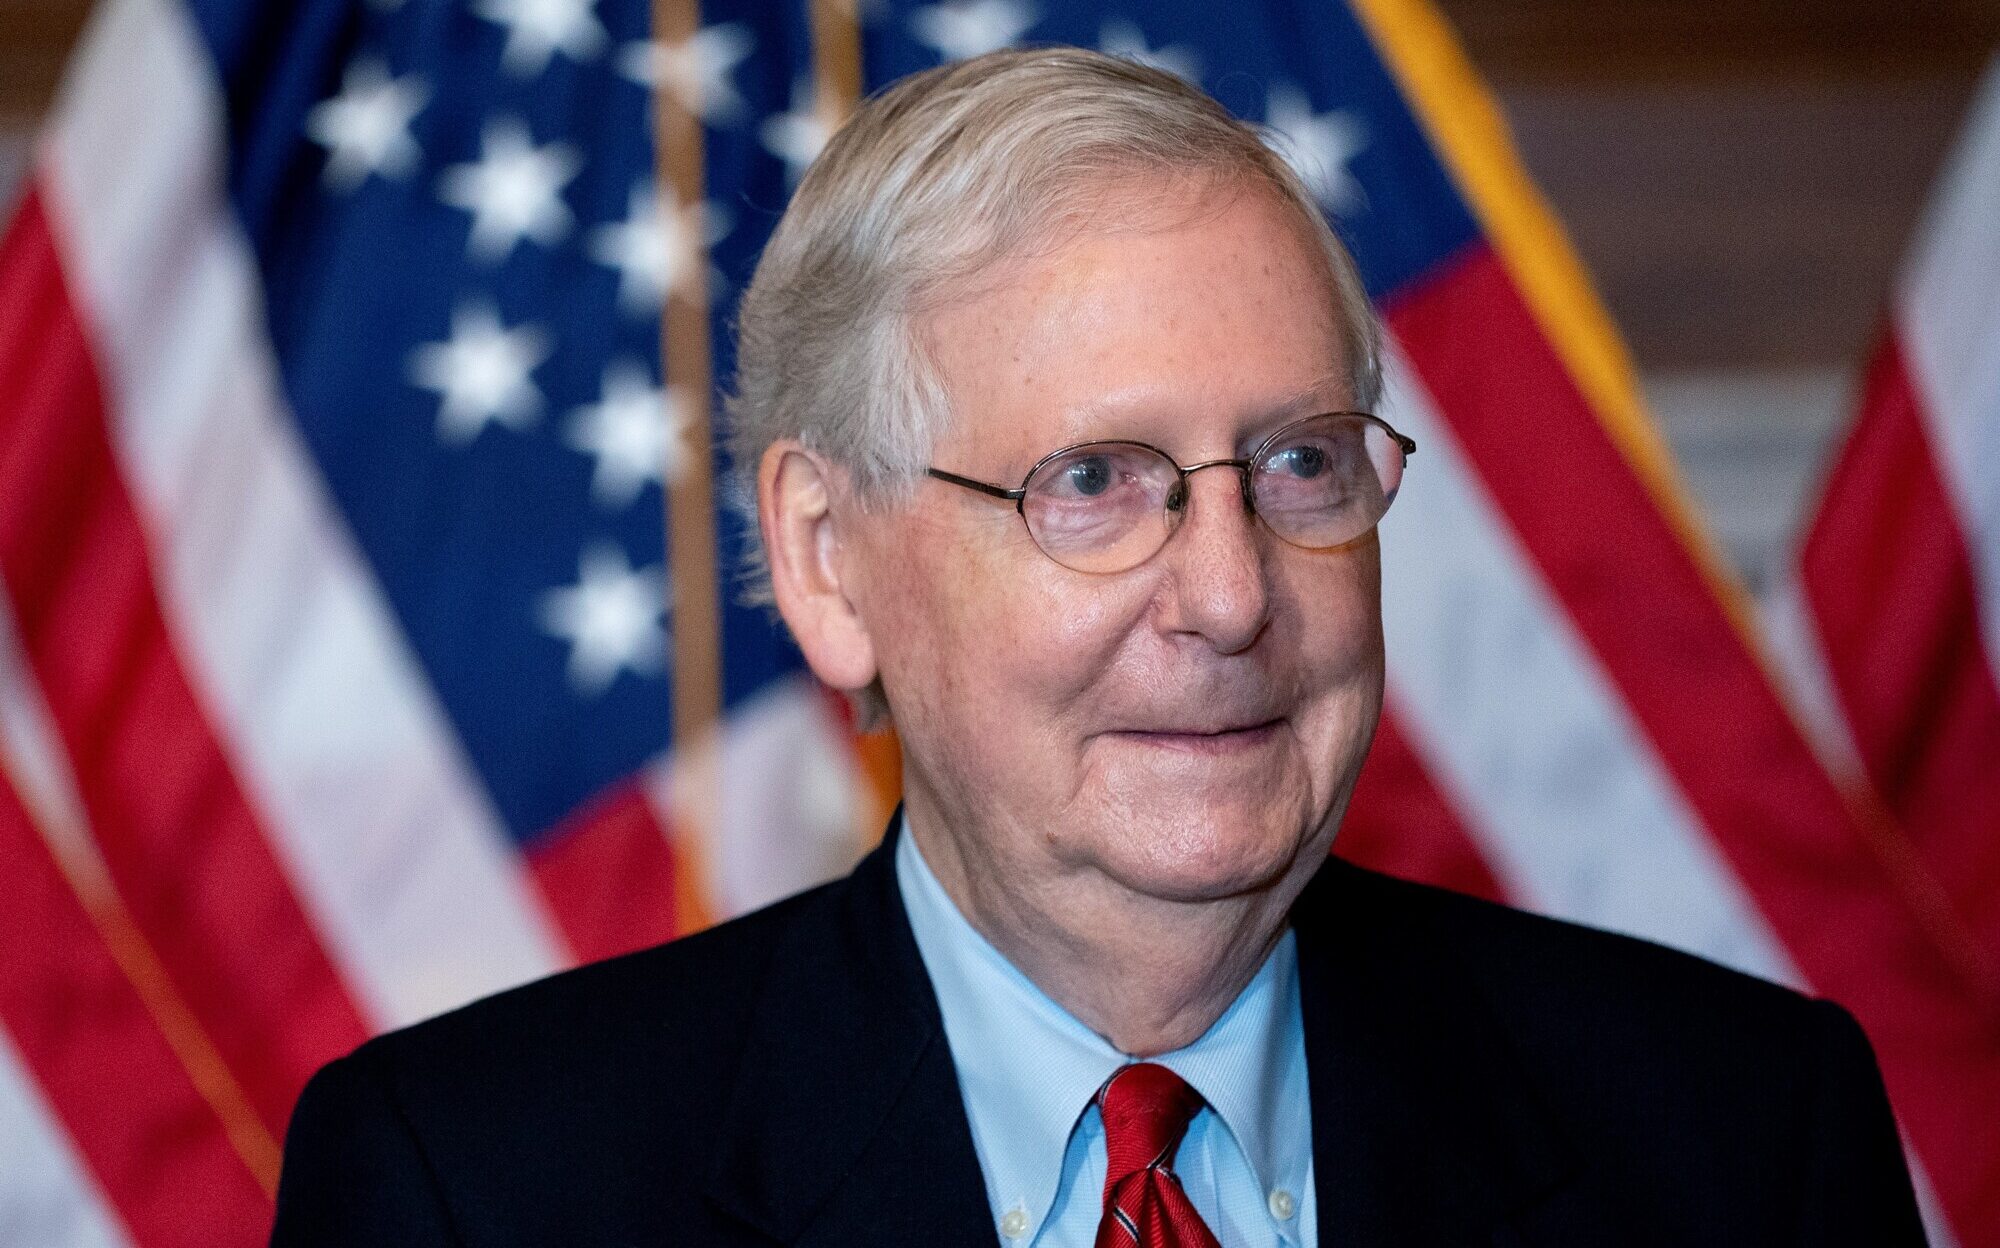 McConnell Reelected as Senate Majority Leader